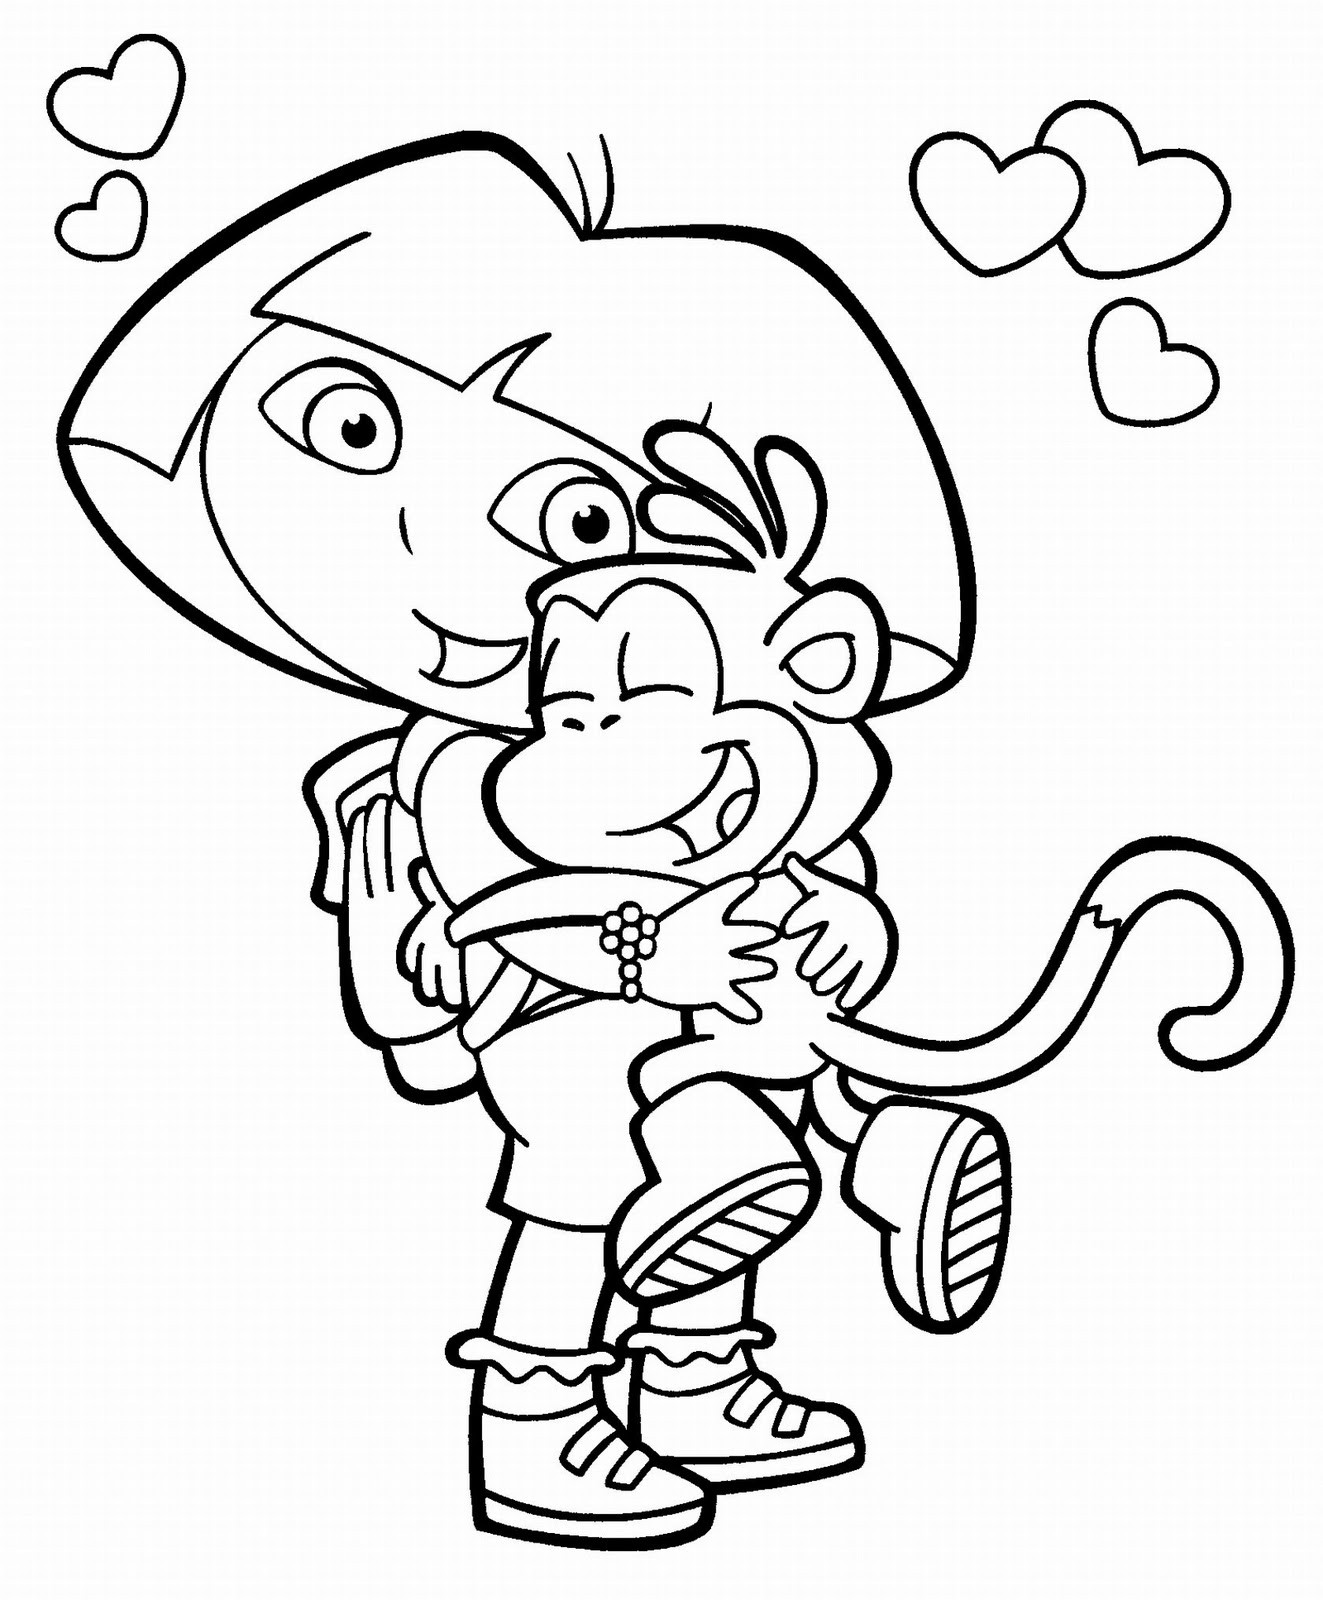 Dora Coloring Pages Printable
 Dora Coloring Pages CuteColoring